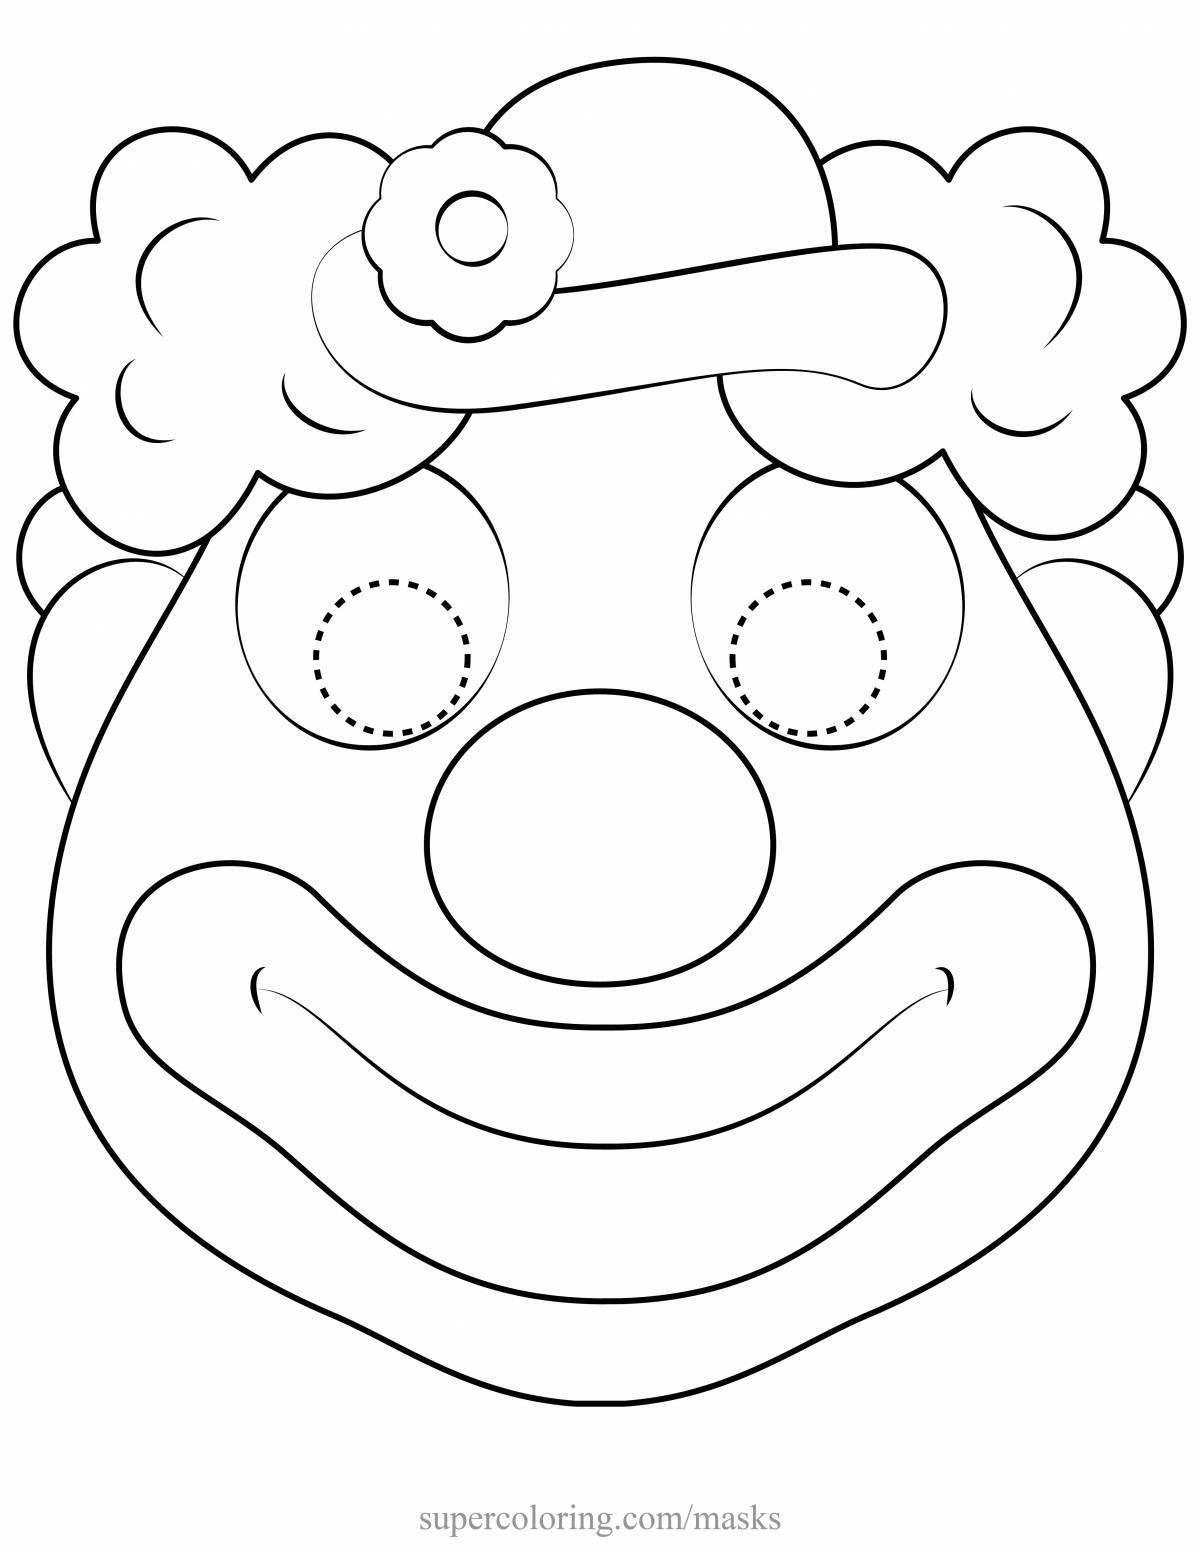 Coloring page dazzling masks for kids